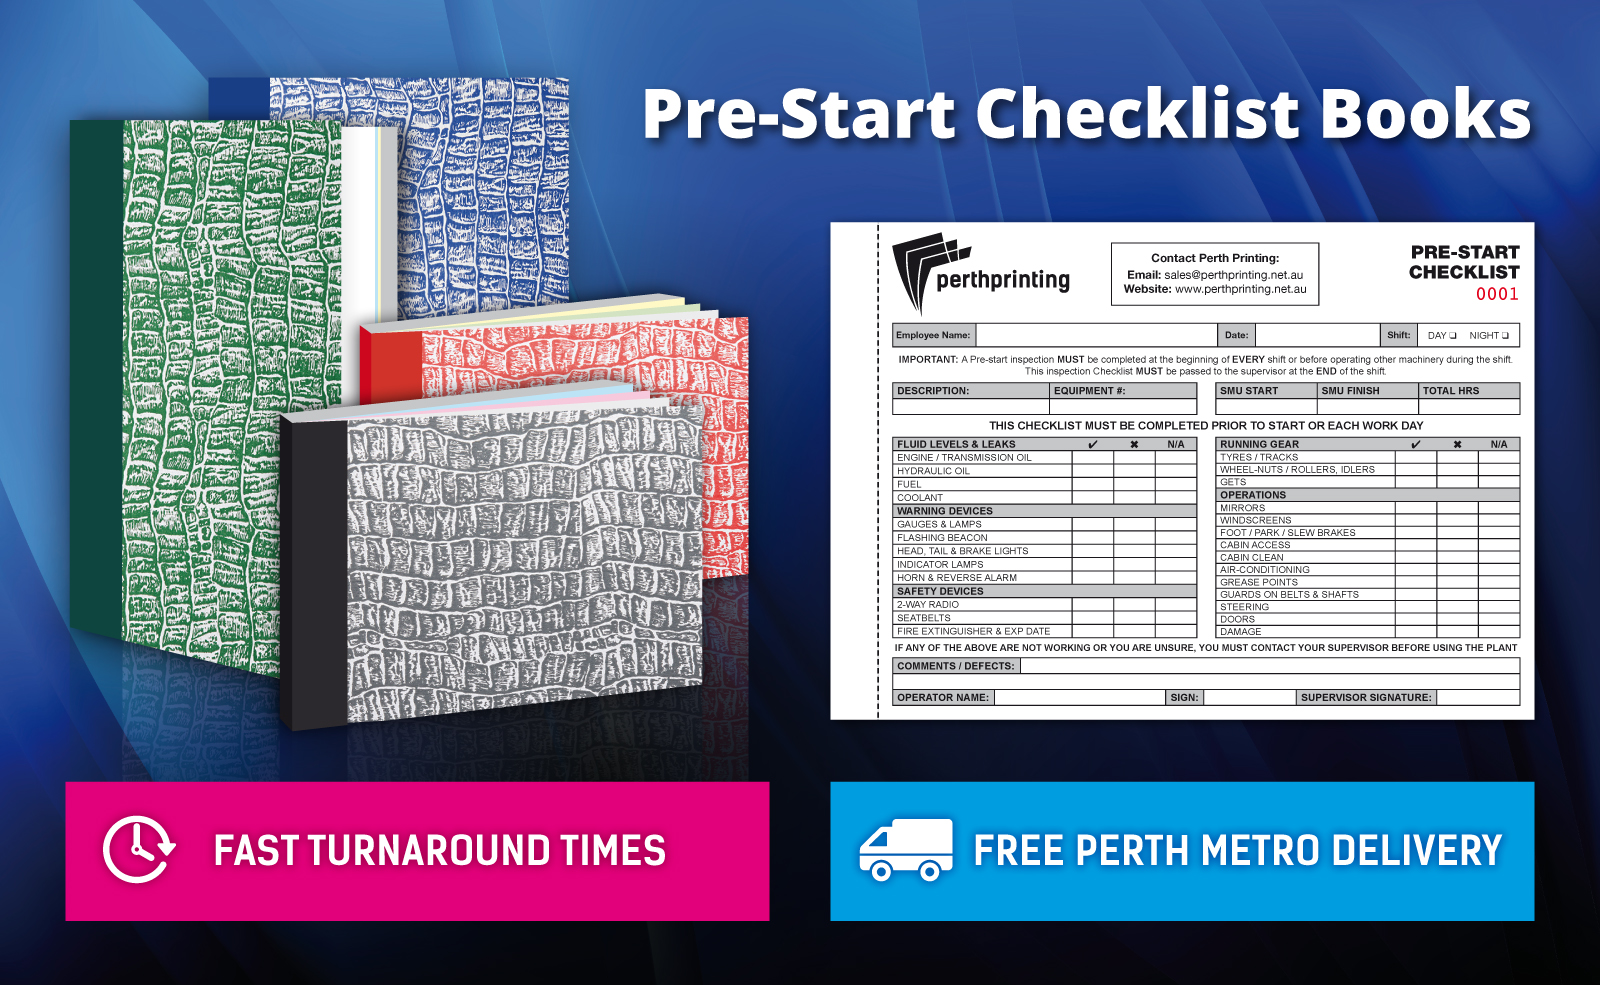 Carbonless Pre-Start Checklist Books Designed and Printed by Perth Printing